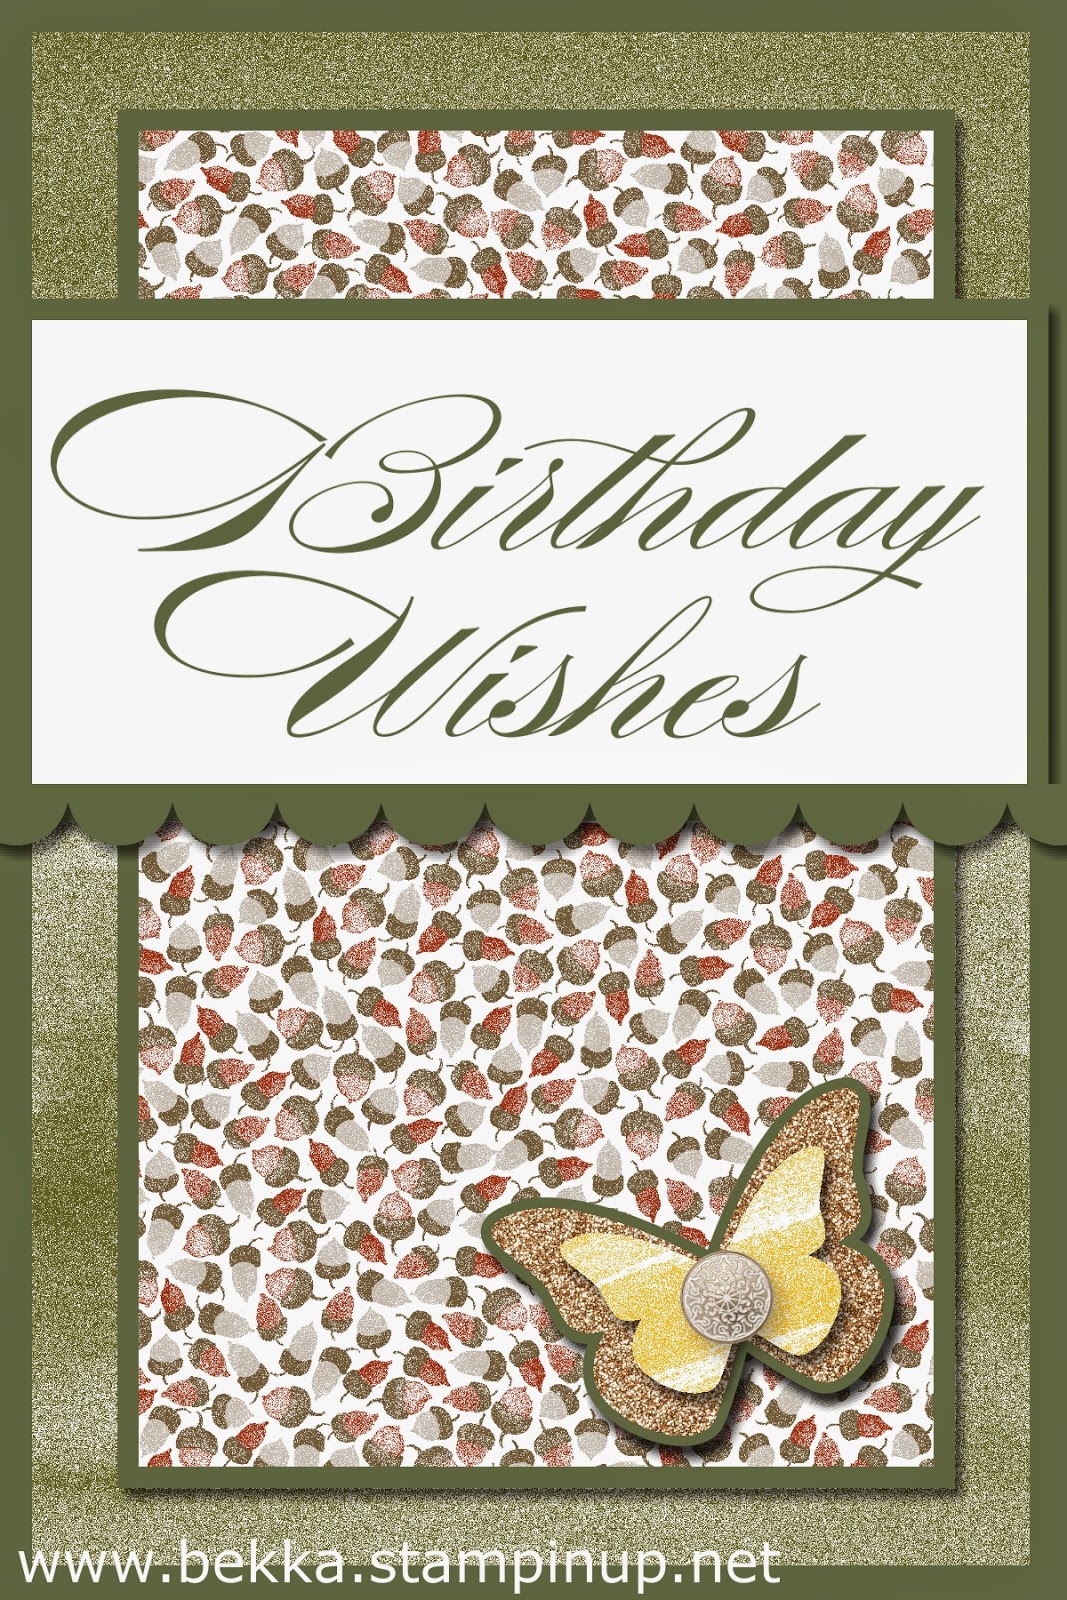 Digital Birthday Card by Stampin' Up! UK Independent Demonstrator Bekka - try digital crafting for yourself here FREE